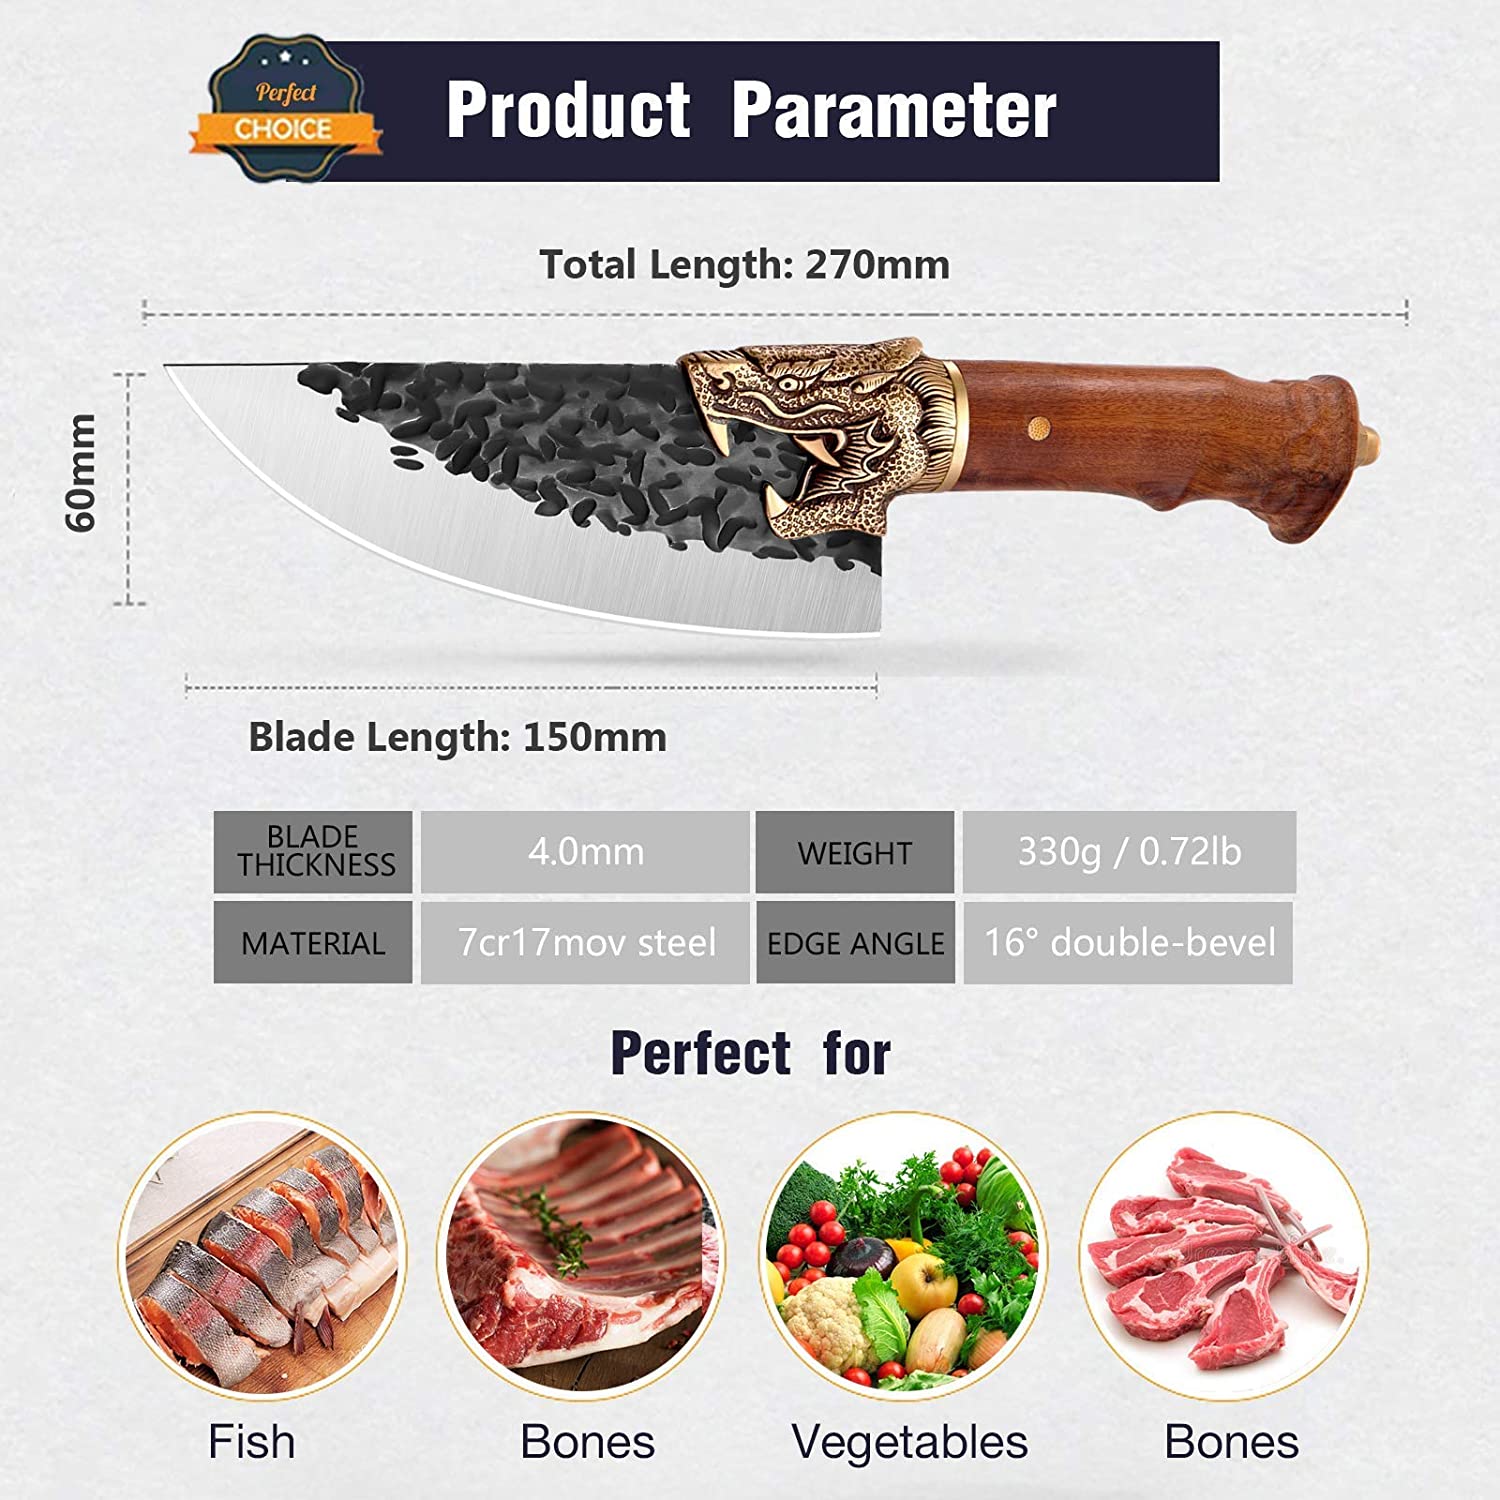  Huusk Knives Viking Knife with Sheath - Hand Forged Butcher  Knife for Meat Cutting - High Carbon Steel Meat Cleaver Kitchen Knife -  Multipurpose Japanese Chef Knives for Camping, Outdoor, BBQ